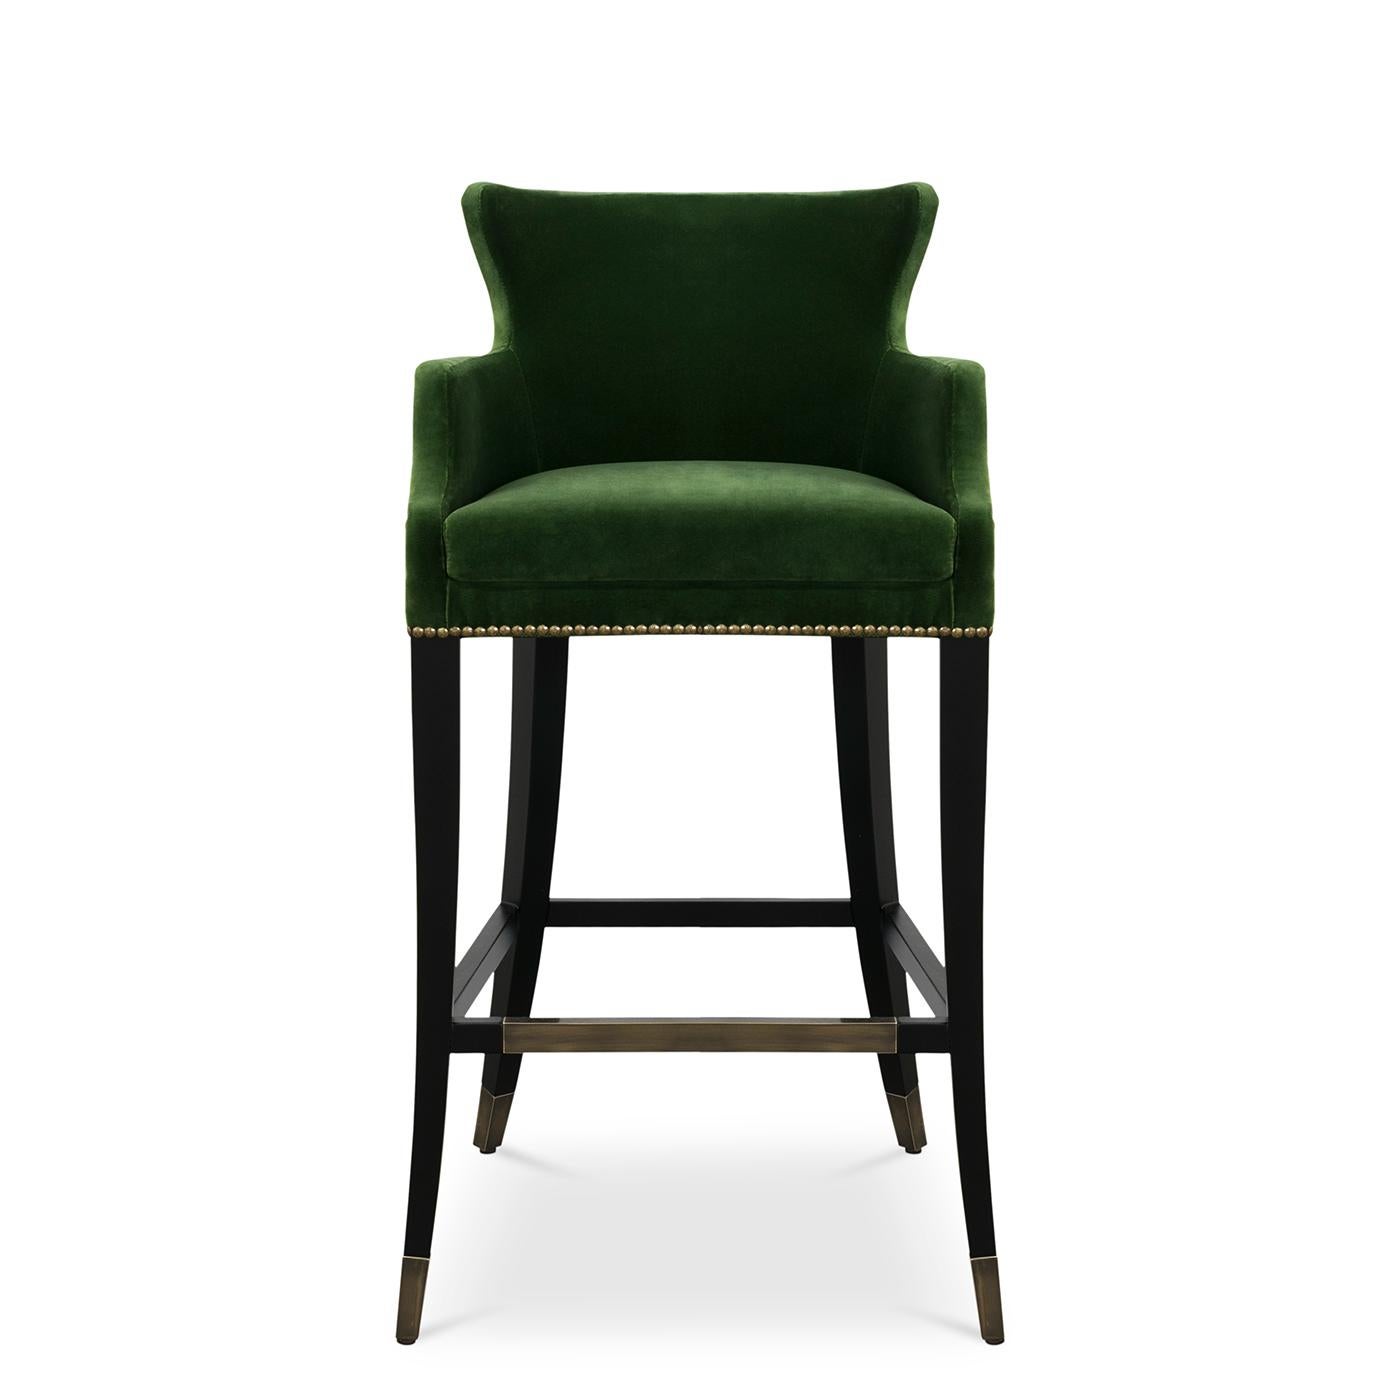 Bar stool Komo with solid wood structure in black finish,
upholstered and covered with Grade A velvet fabric.
With reinforced footrest and feet in solid brass in brushed finish.
Also available with other fabric colors finishes in Grade A, 
on